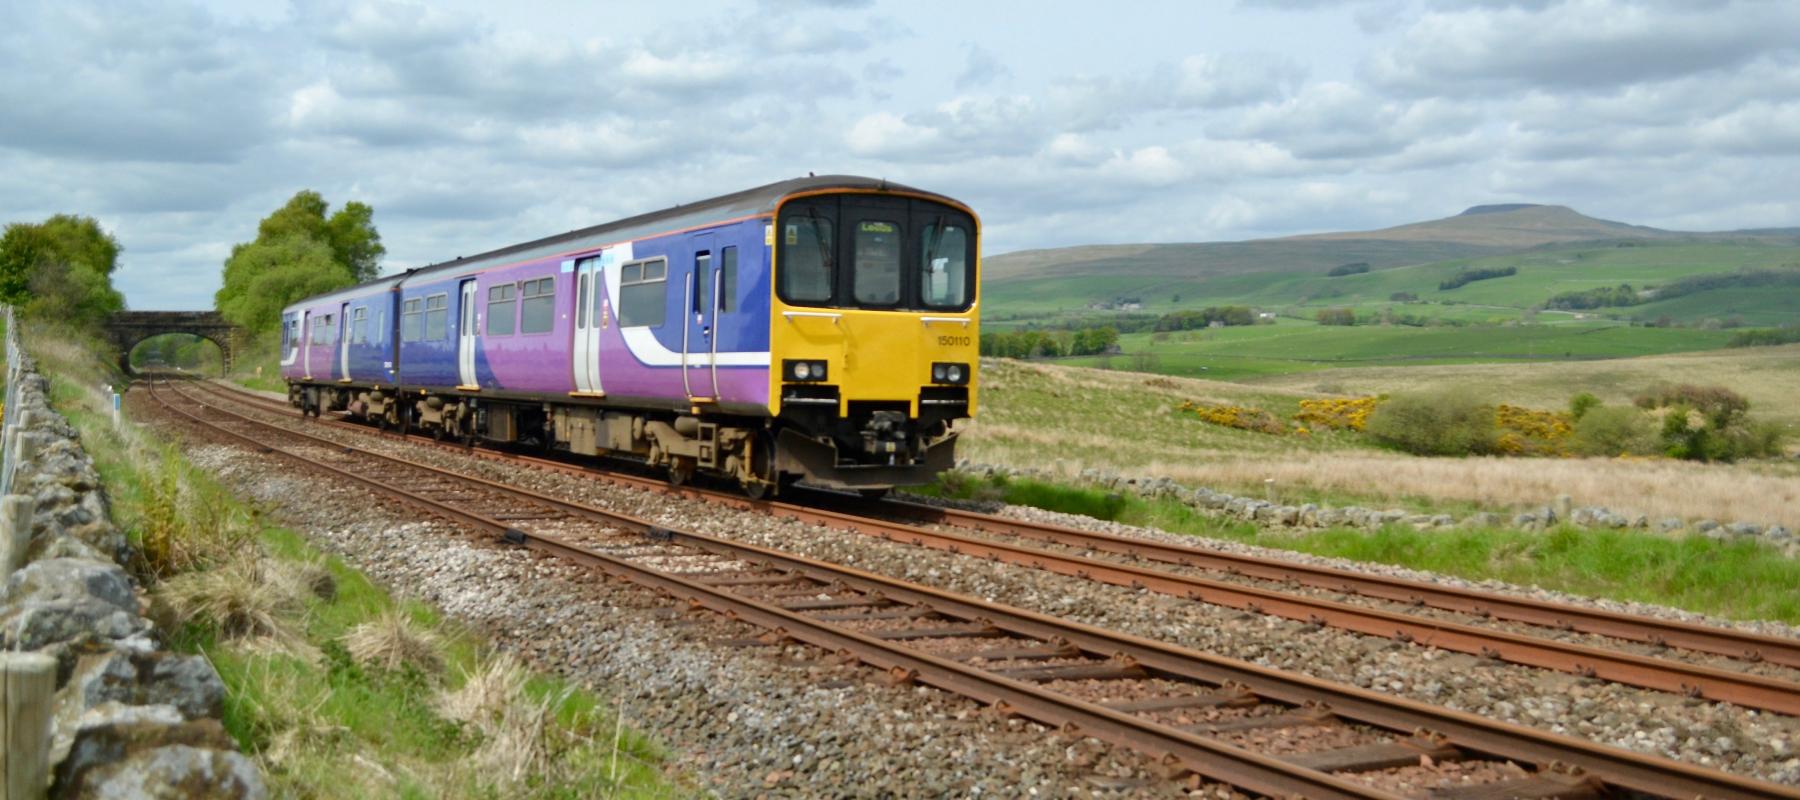 Bentham Line train travelling through the countryside